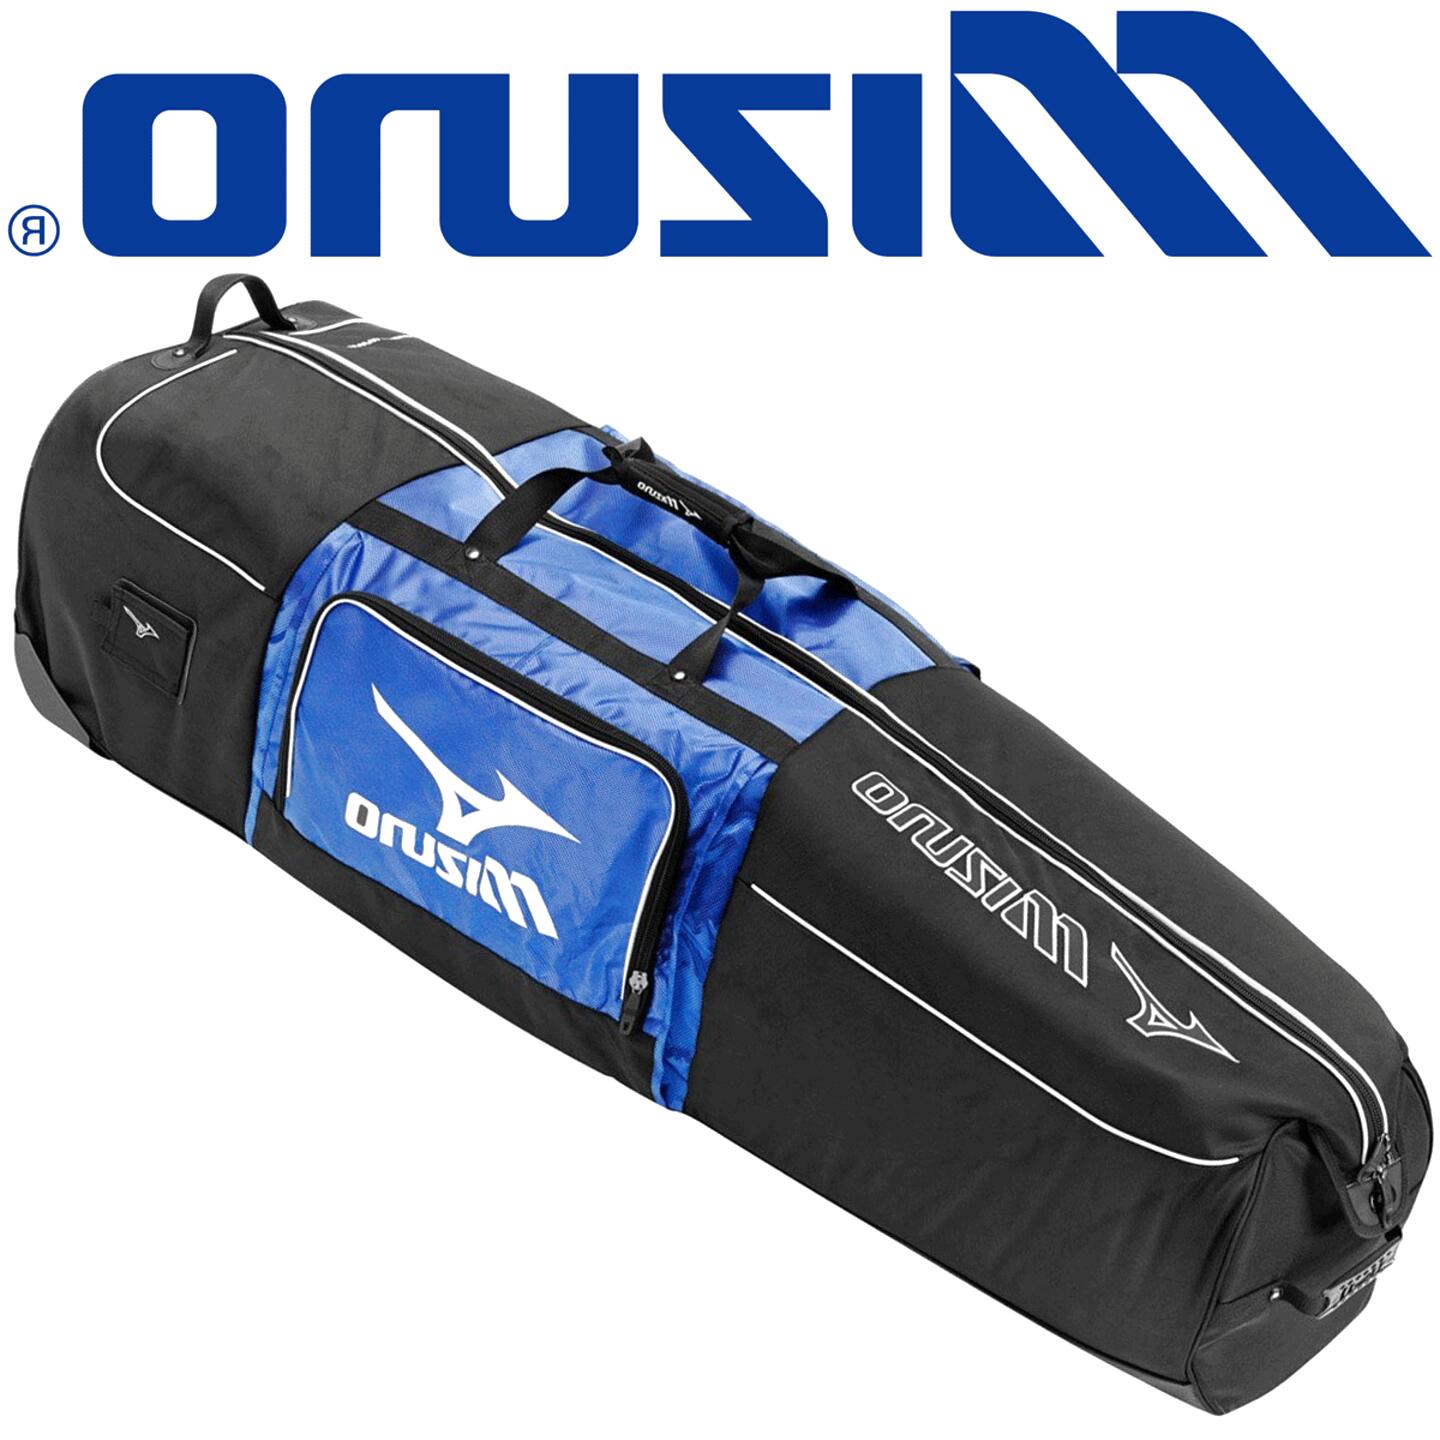 Travel Mizuno Golf Bag for sale in UK | View 18 bargains